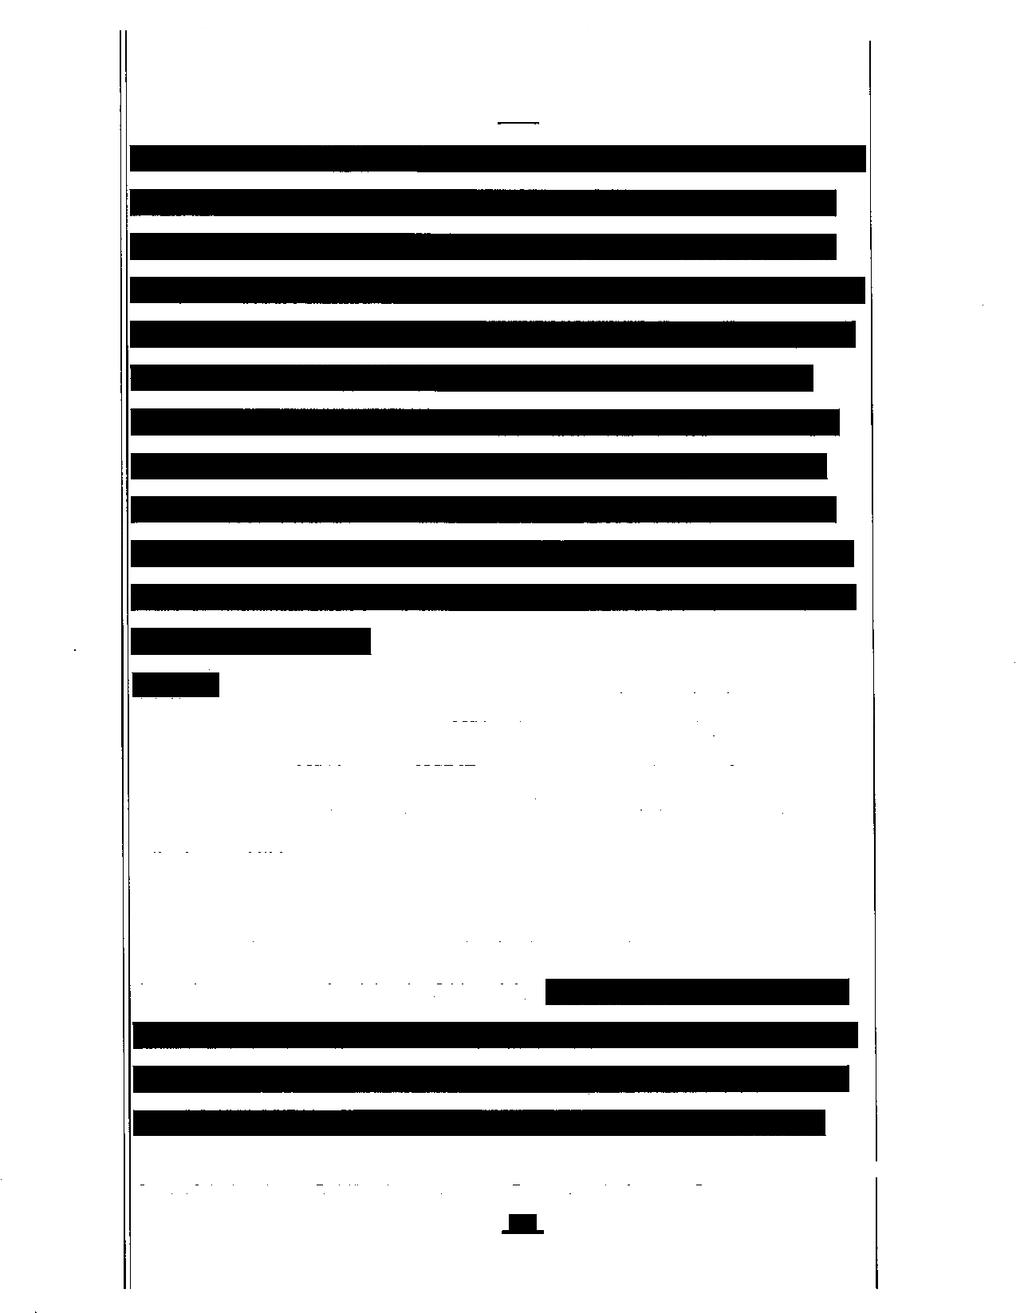 Case:0-cv-0-JSW Document Filed0/0/ Page of TOP SECimT//STfeWSt^MORGON/NOFOKN Accordingly, to the extent necessary to address whether U plaintiffs' metadata was actually collected, revealing the